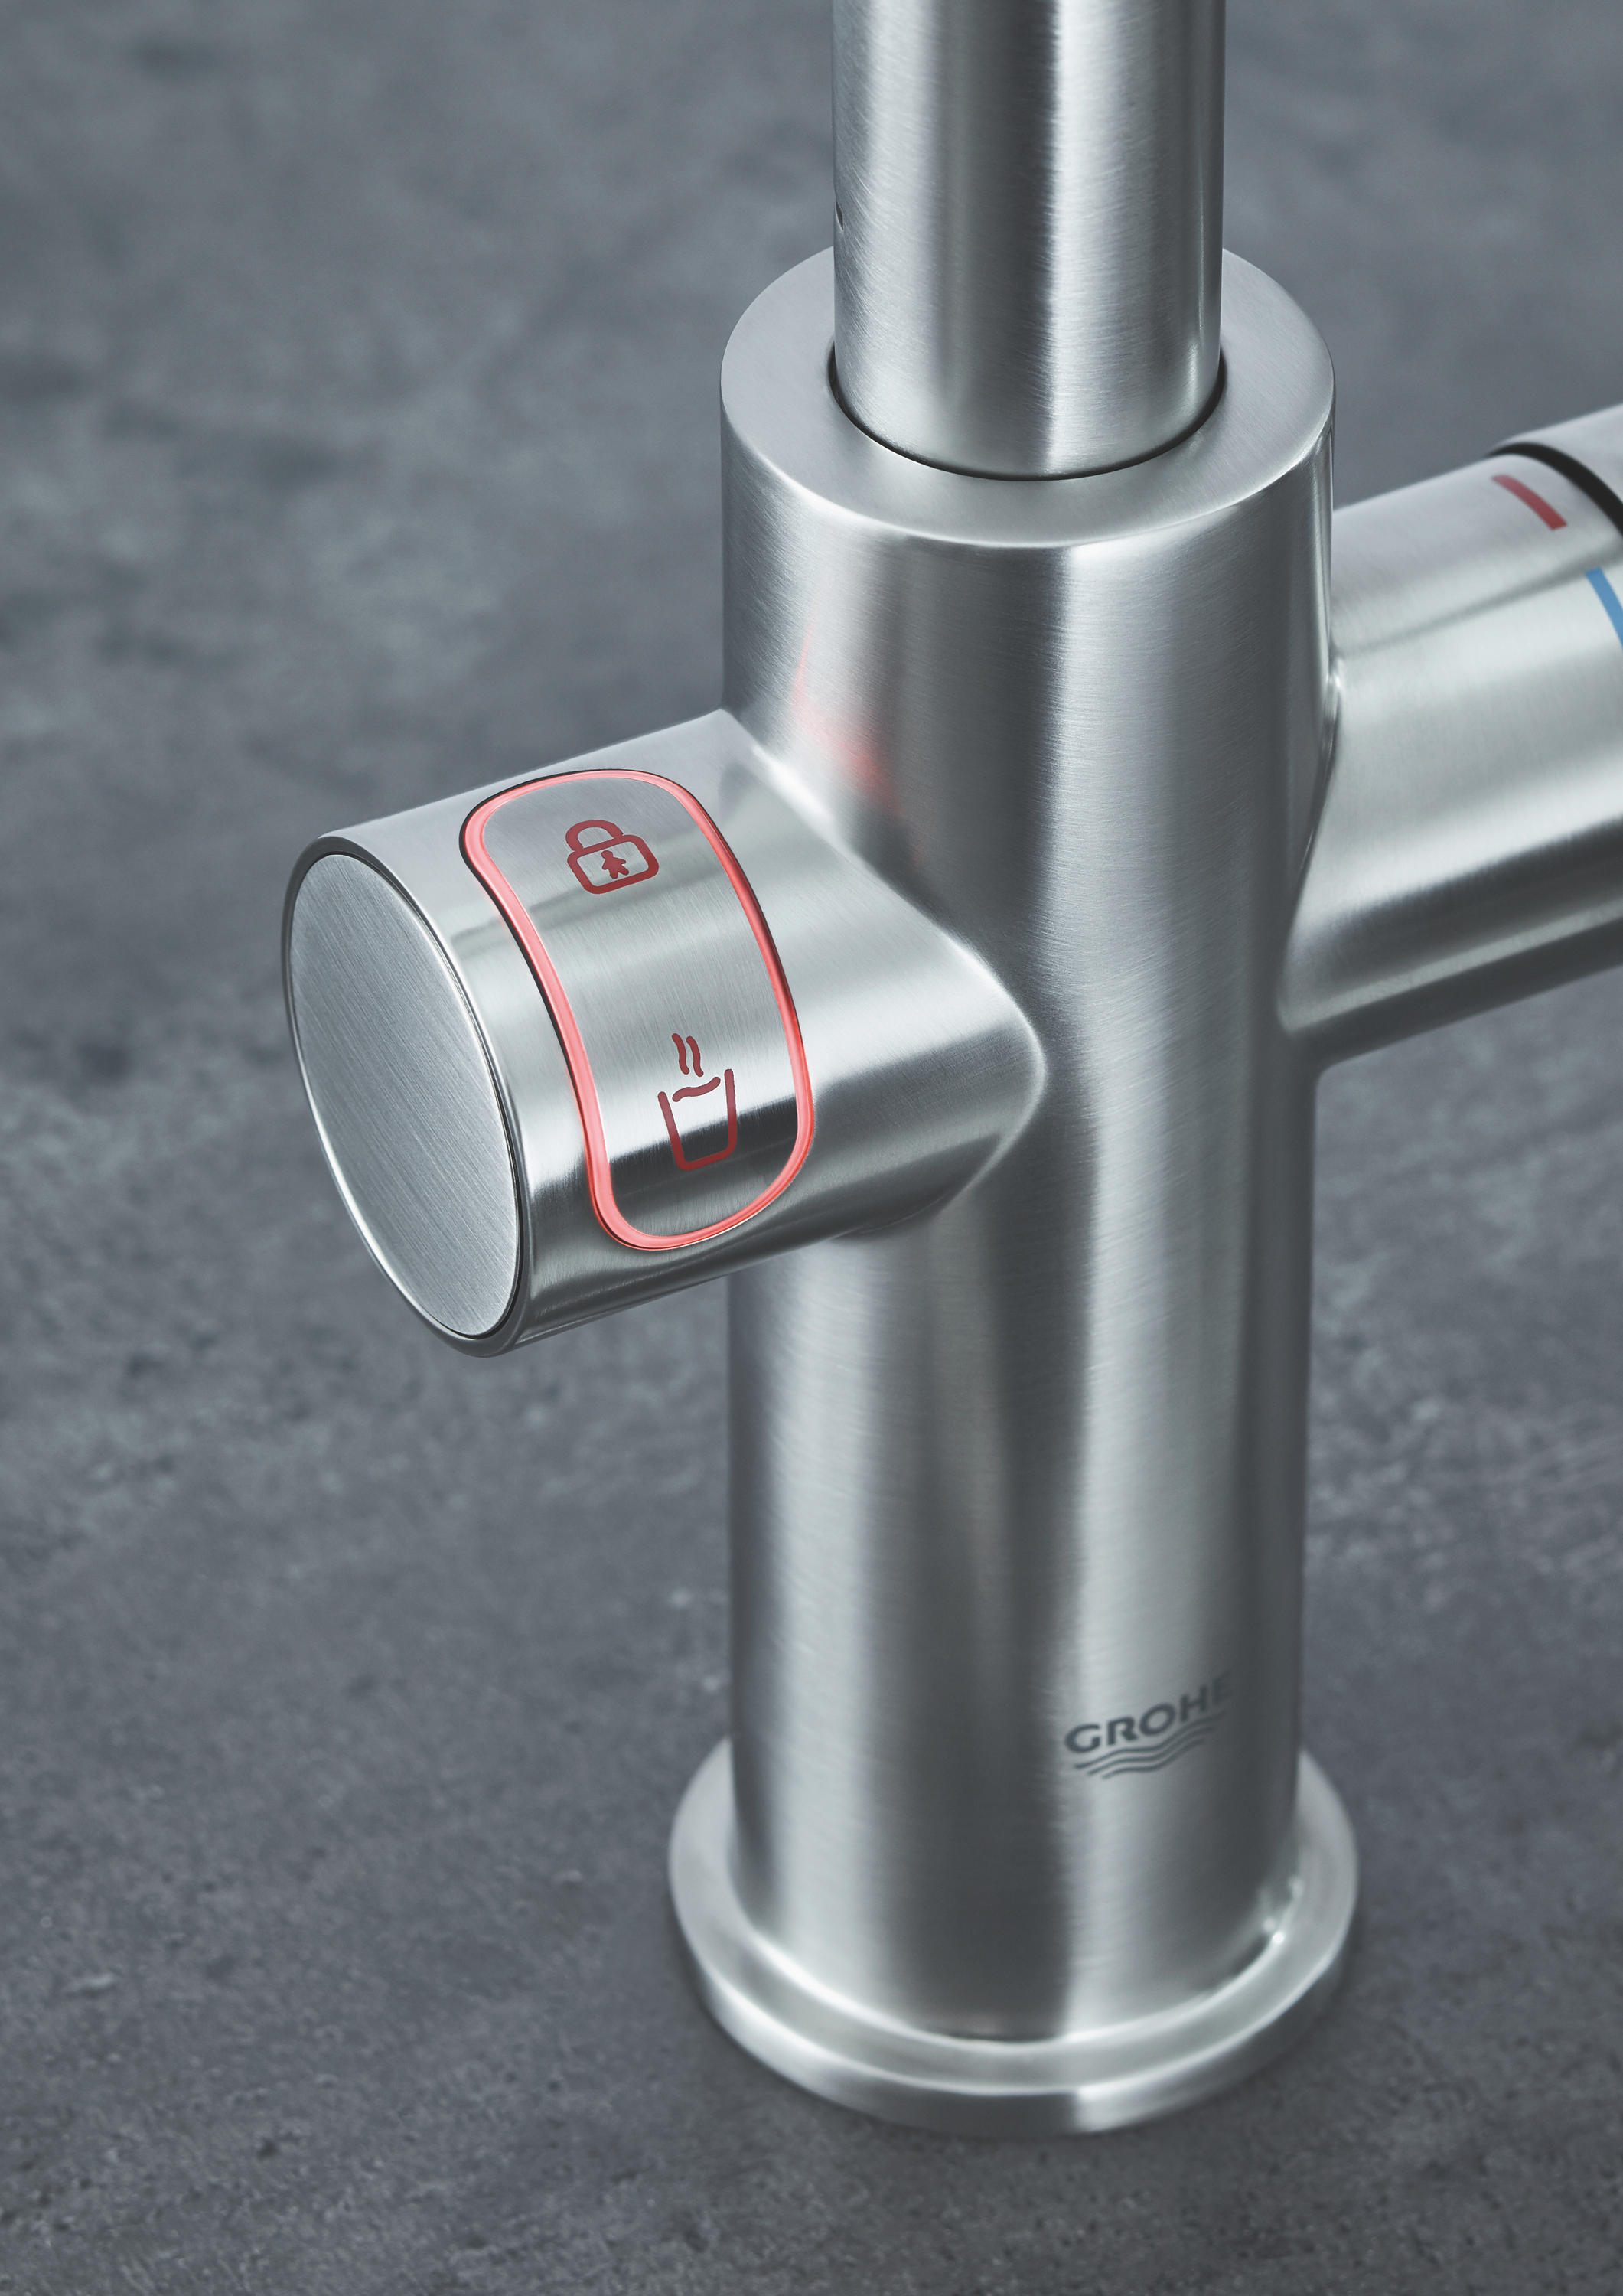 GROHE Red tap and M size boiler Architonic